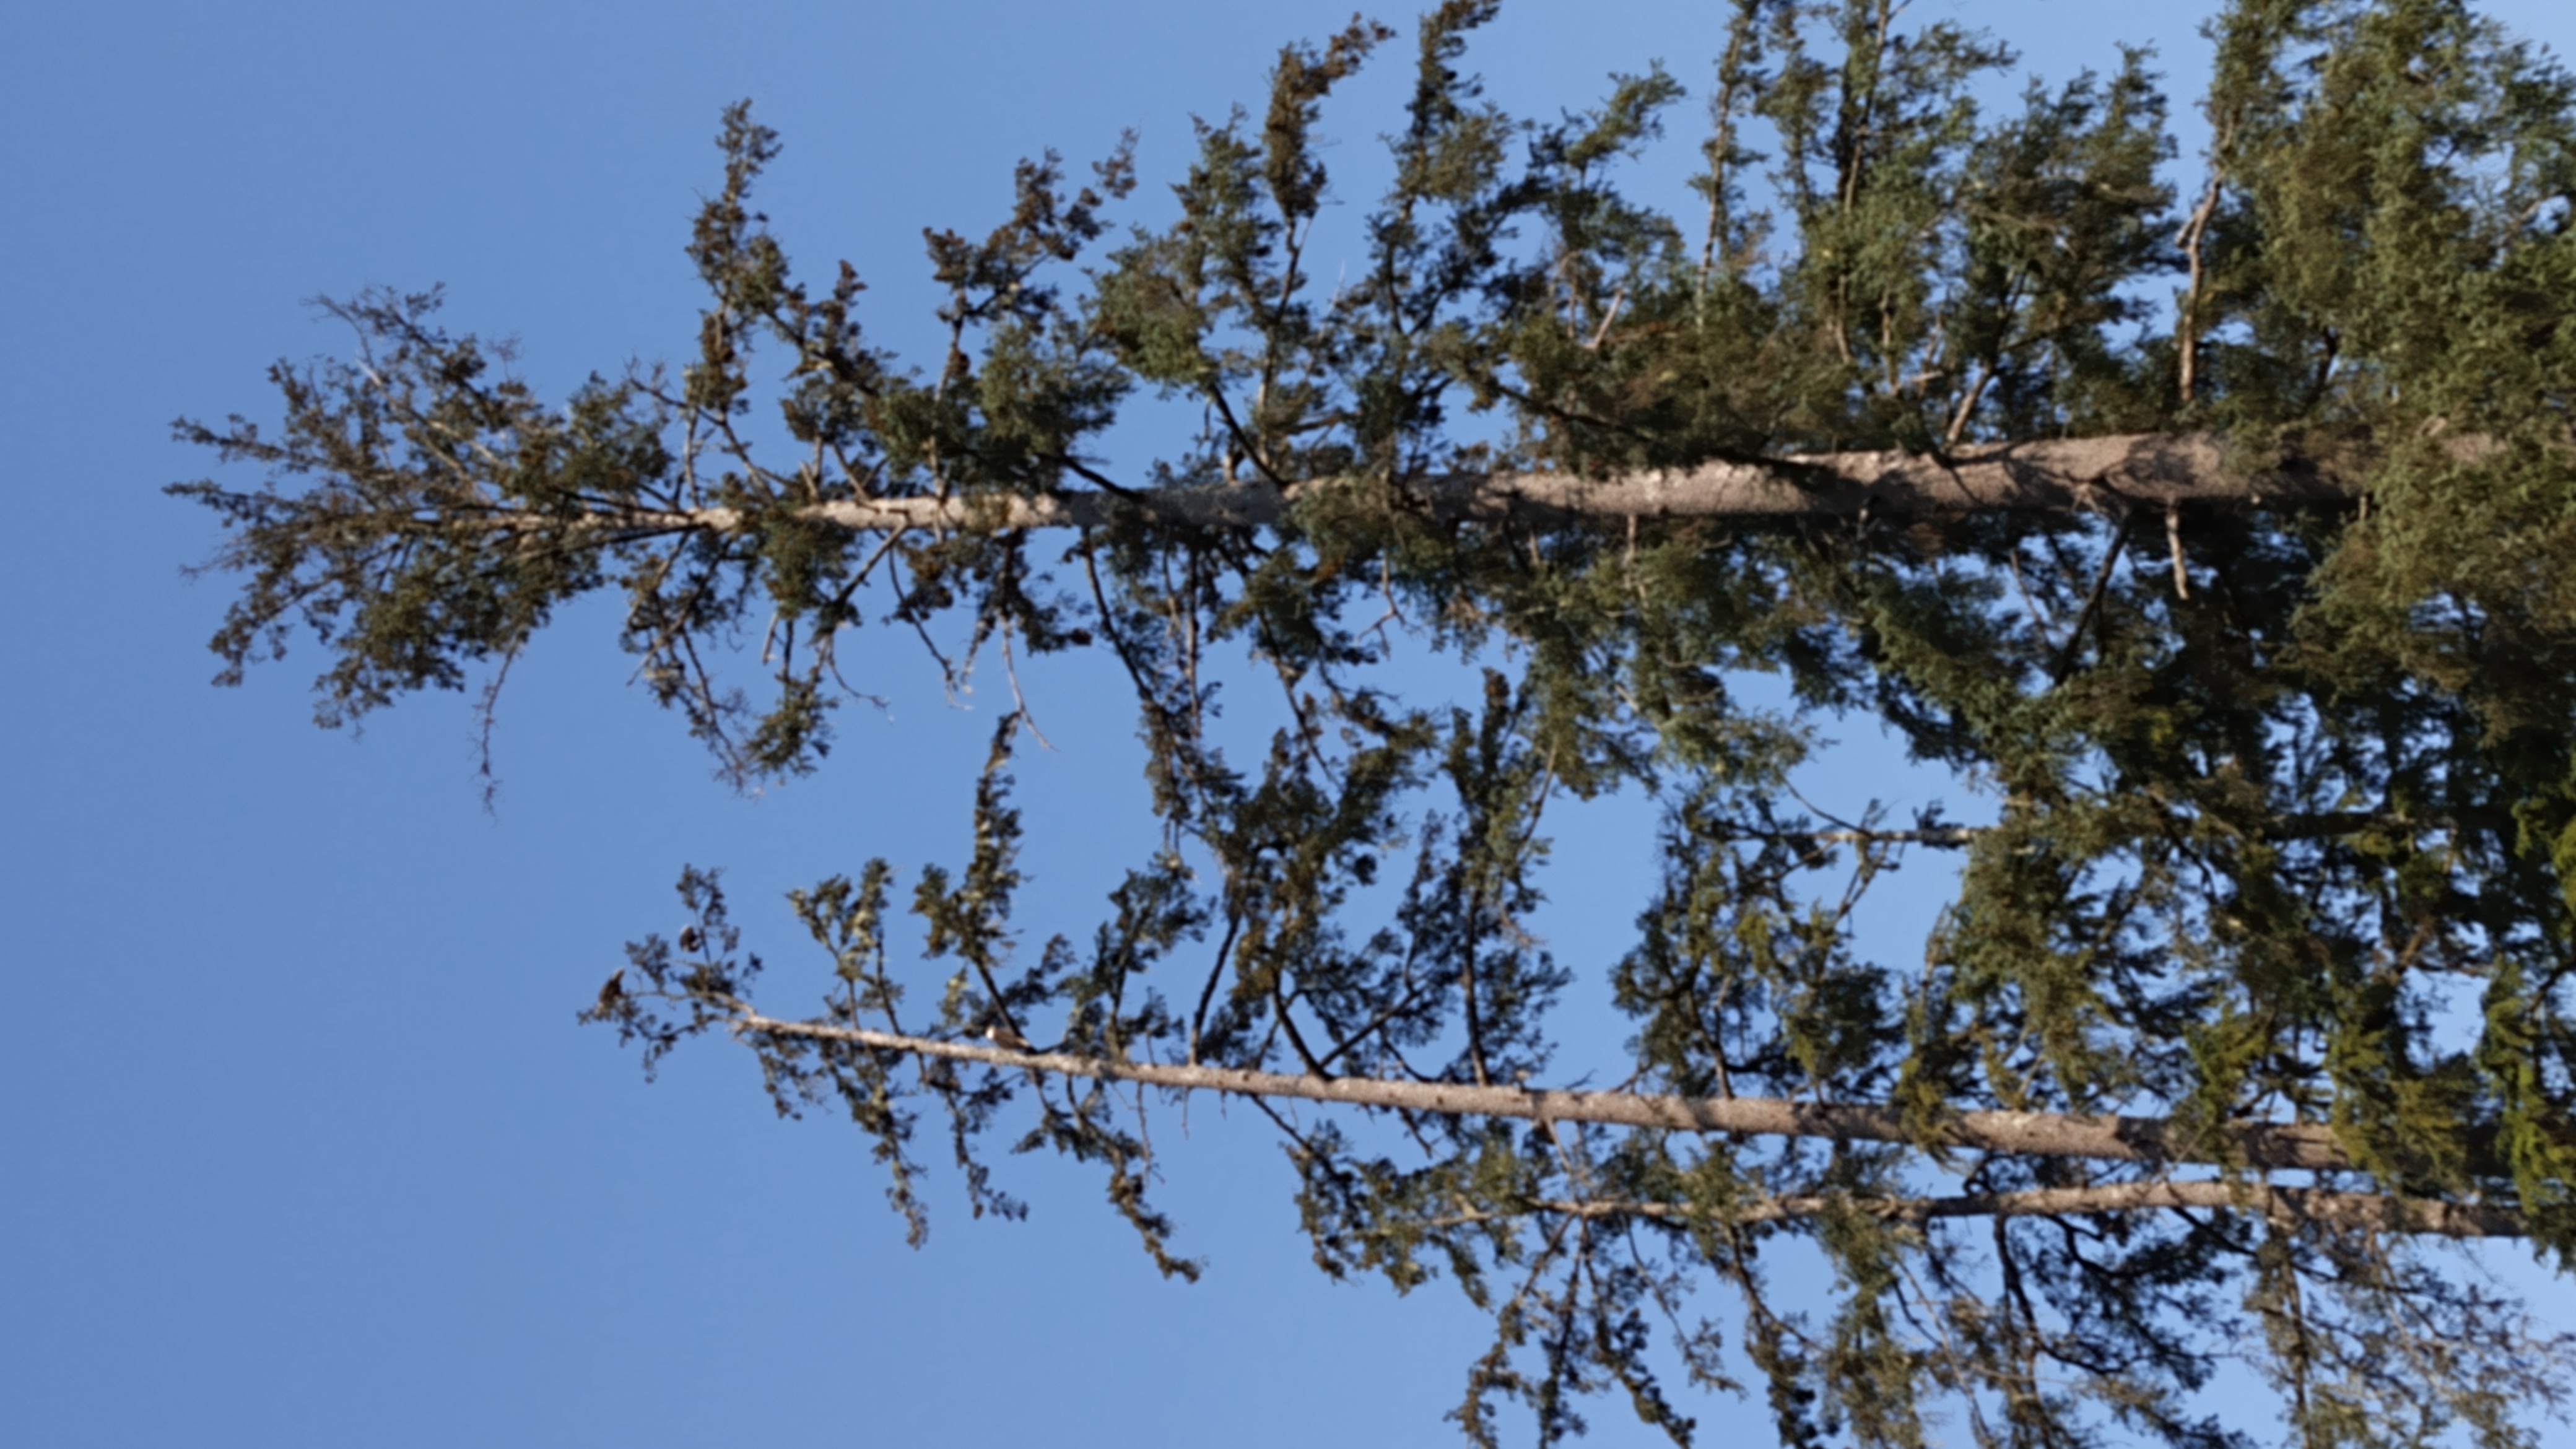 Two tall conifers (Sitka spruce or western hemlock), the one on the left is a bit shorter, but it is possible make out three bald eagles lounging in the uppermost branches of the tree